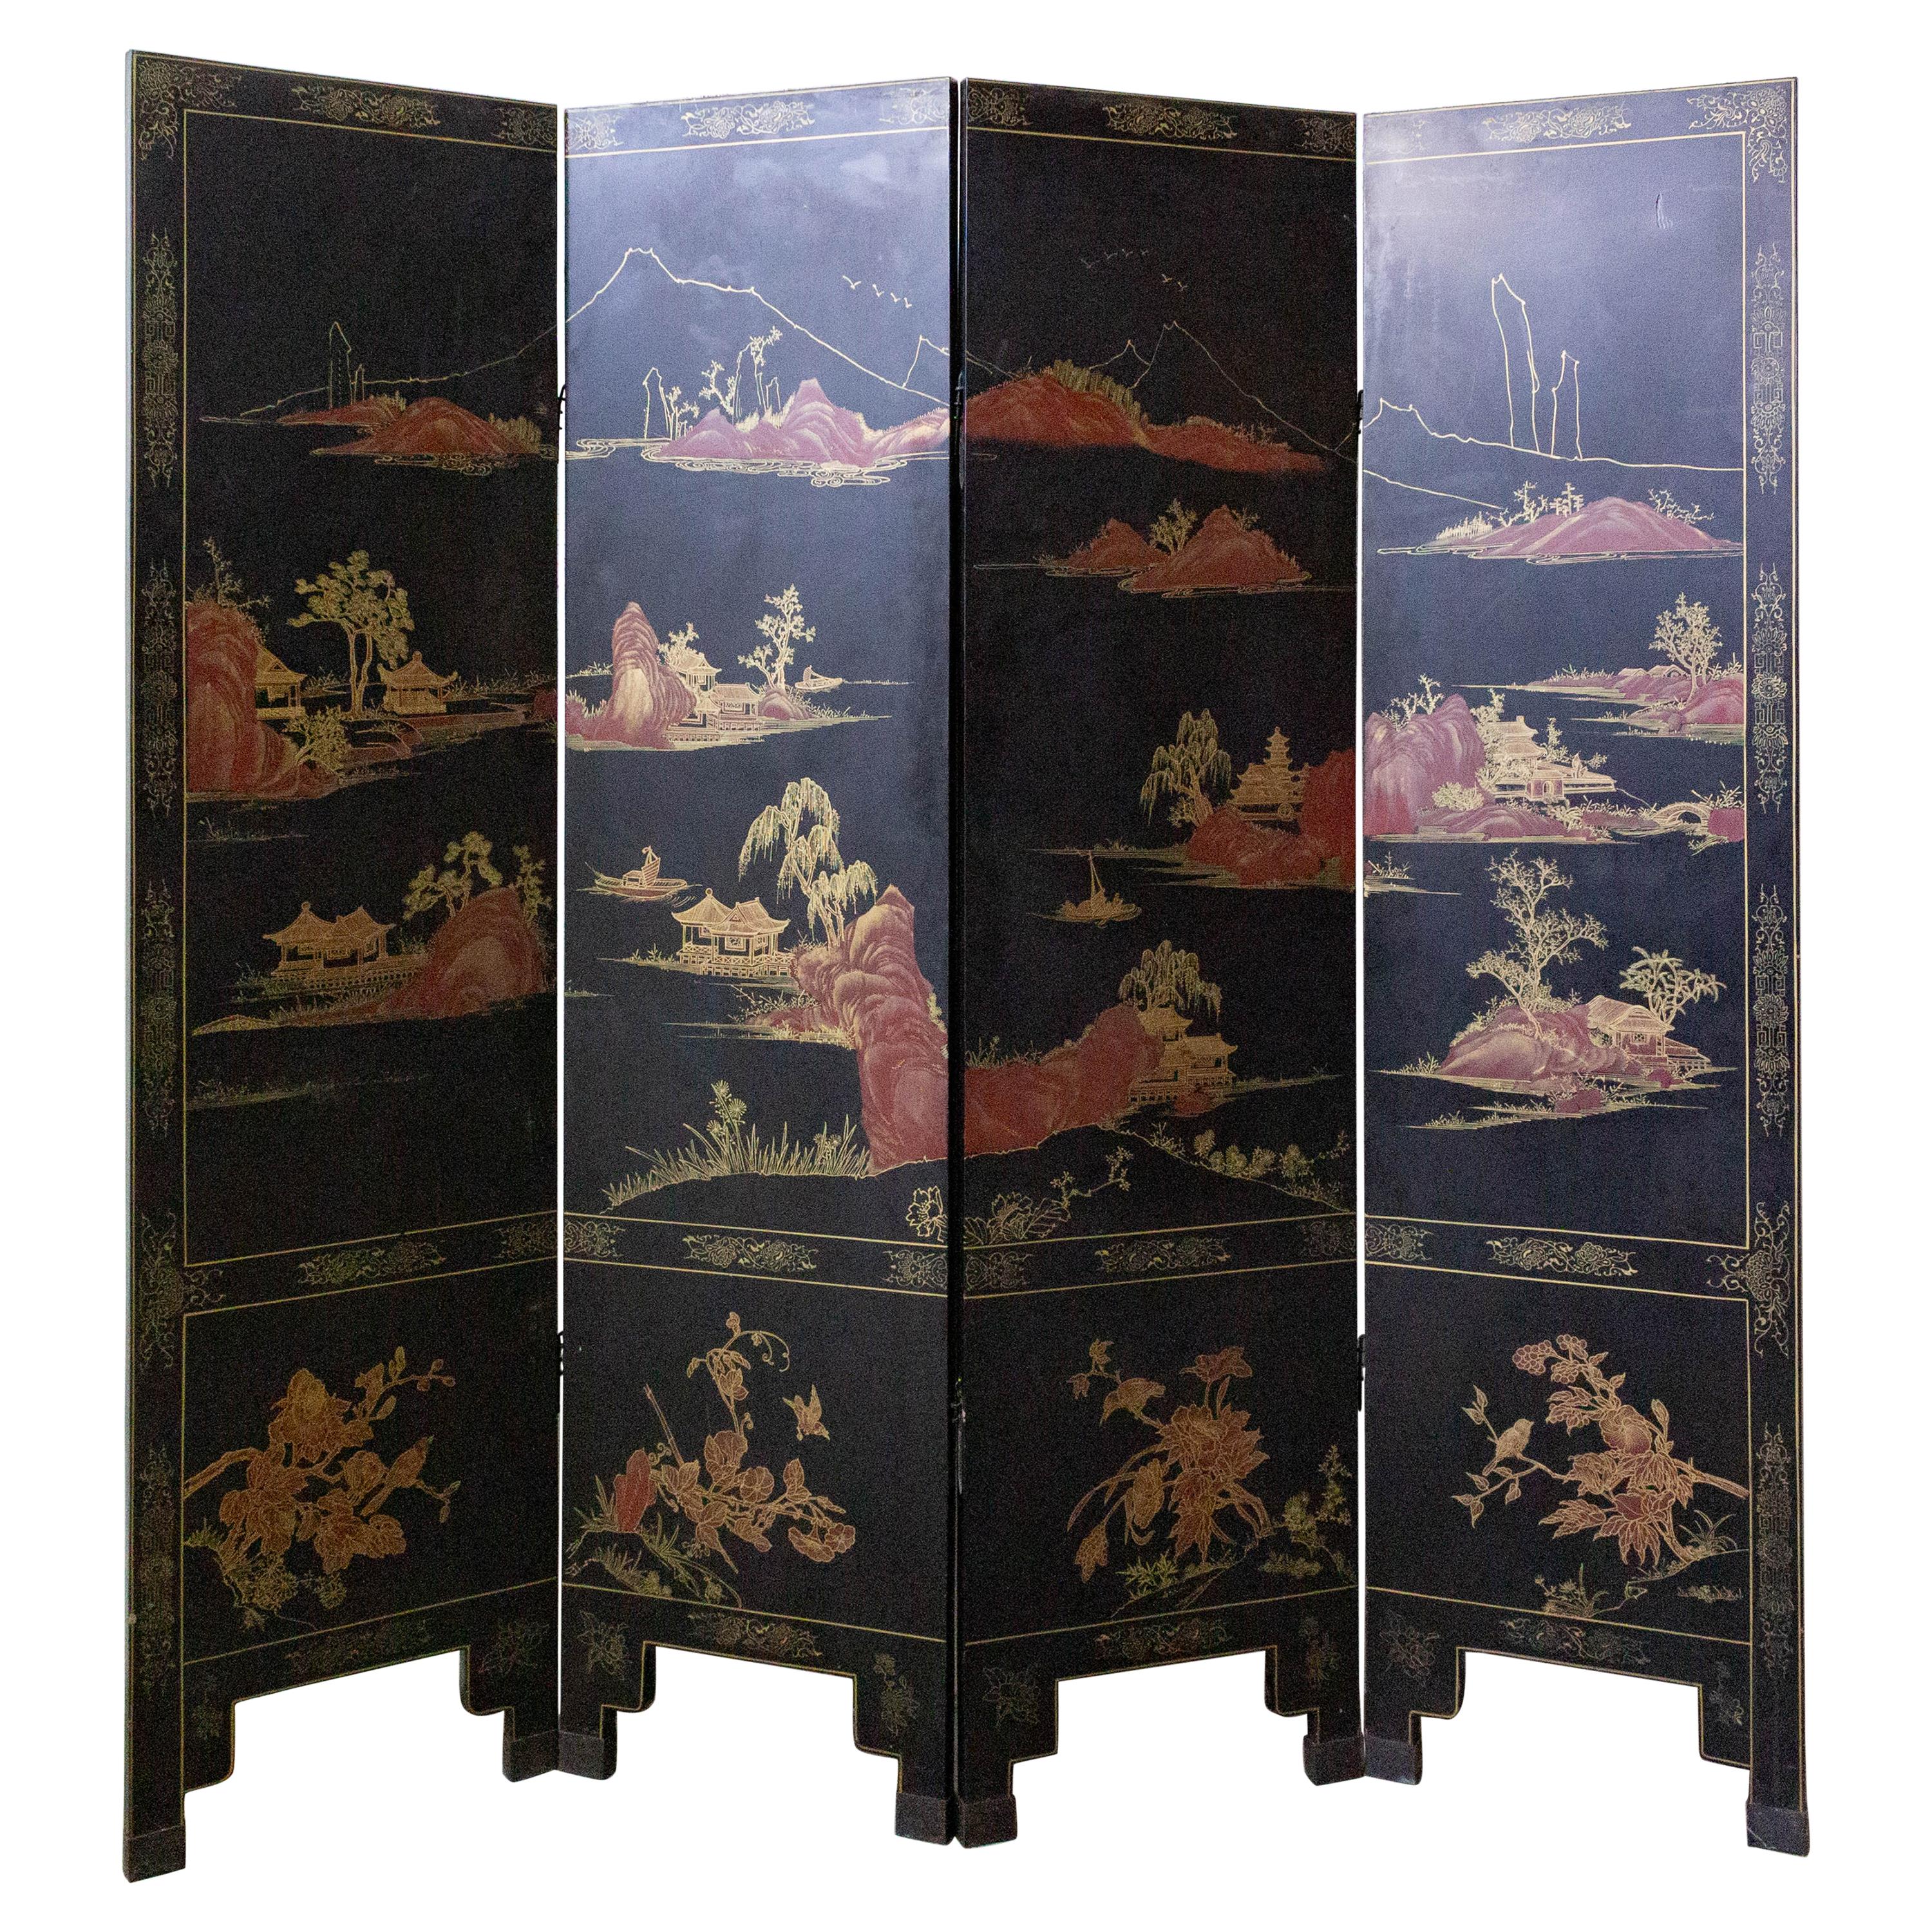 Chinese Black Lacquer Four-Panel Folding Screen Room Divider, Late 19th Century